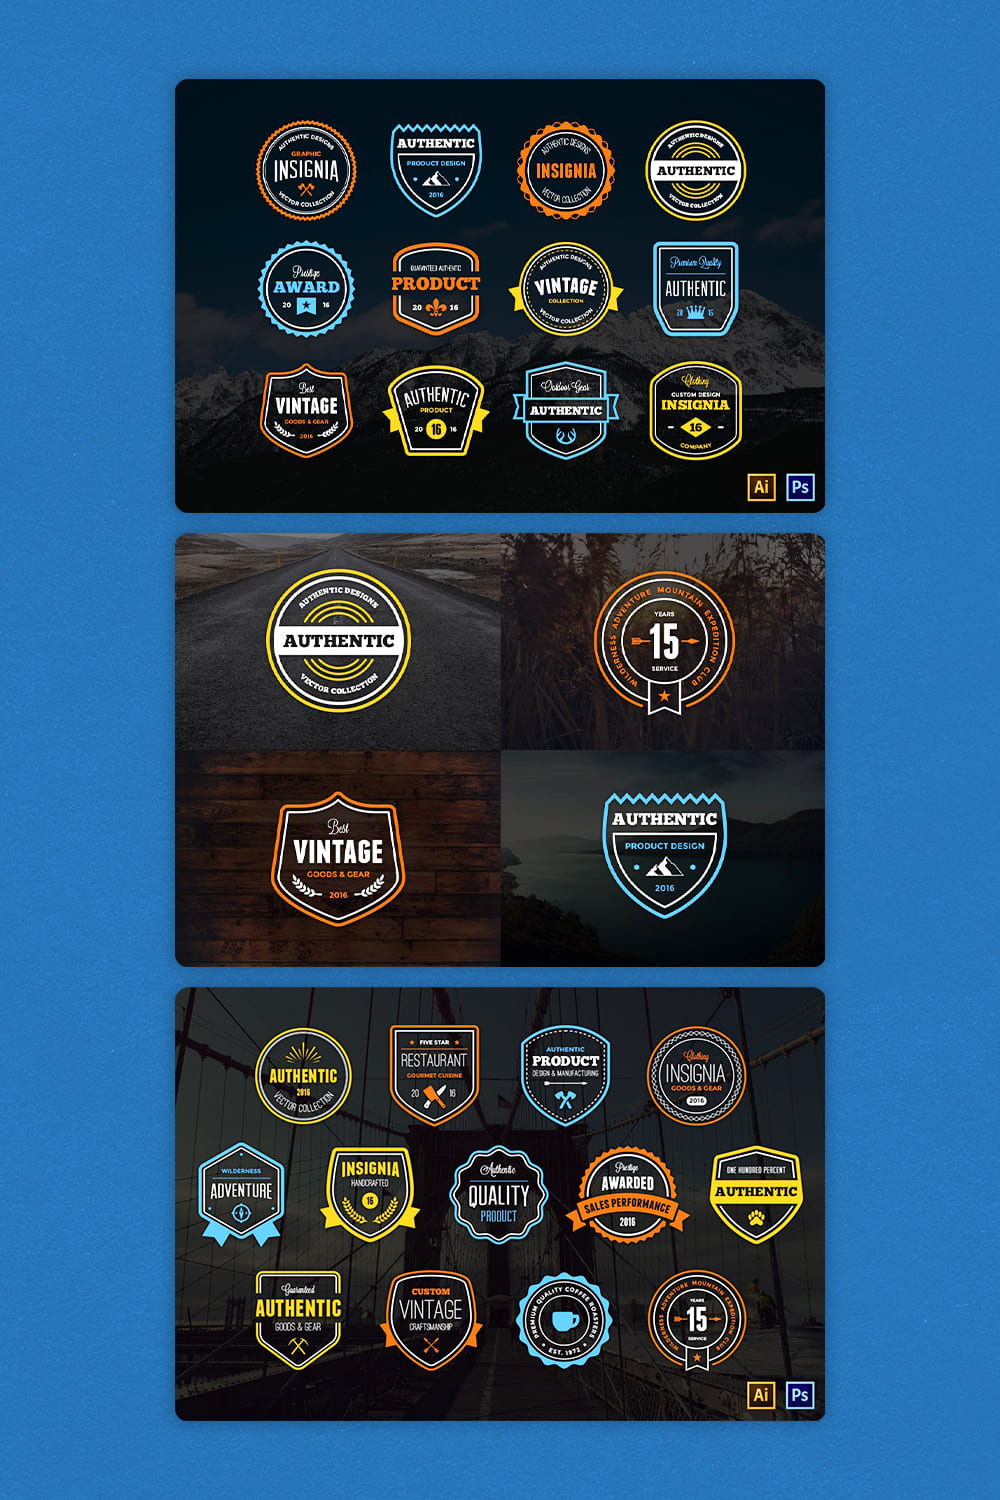 Badge Collection Pinterest image.